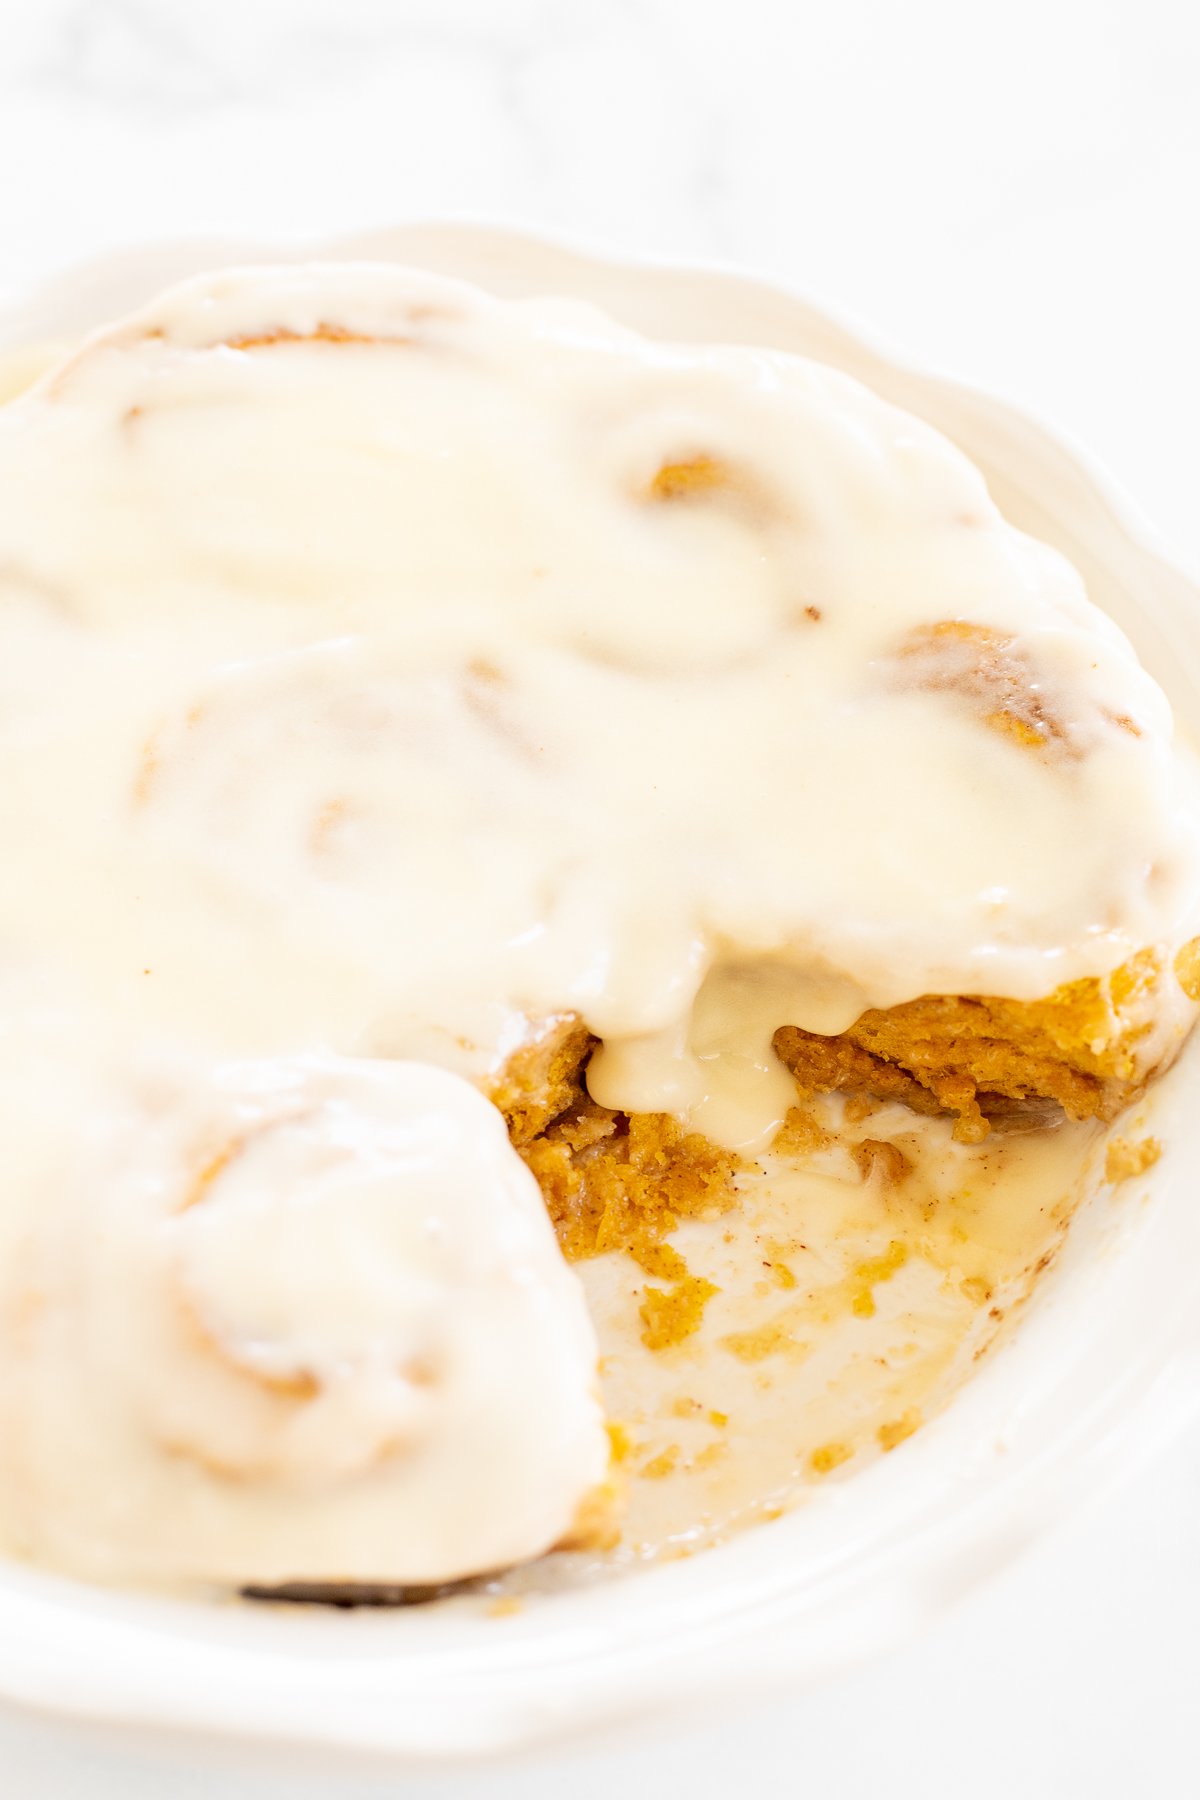 A plate of Pumpkin Cinnamon Rolls with cream cheese frosting.